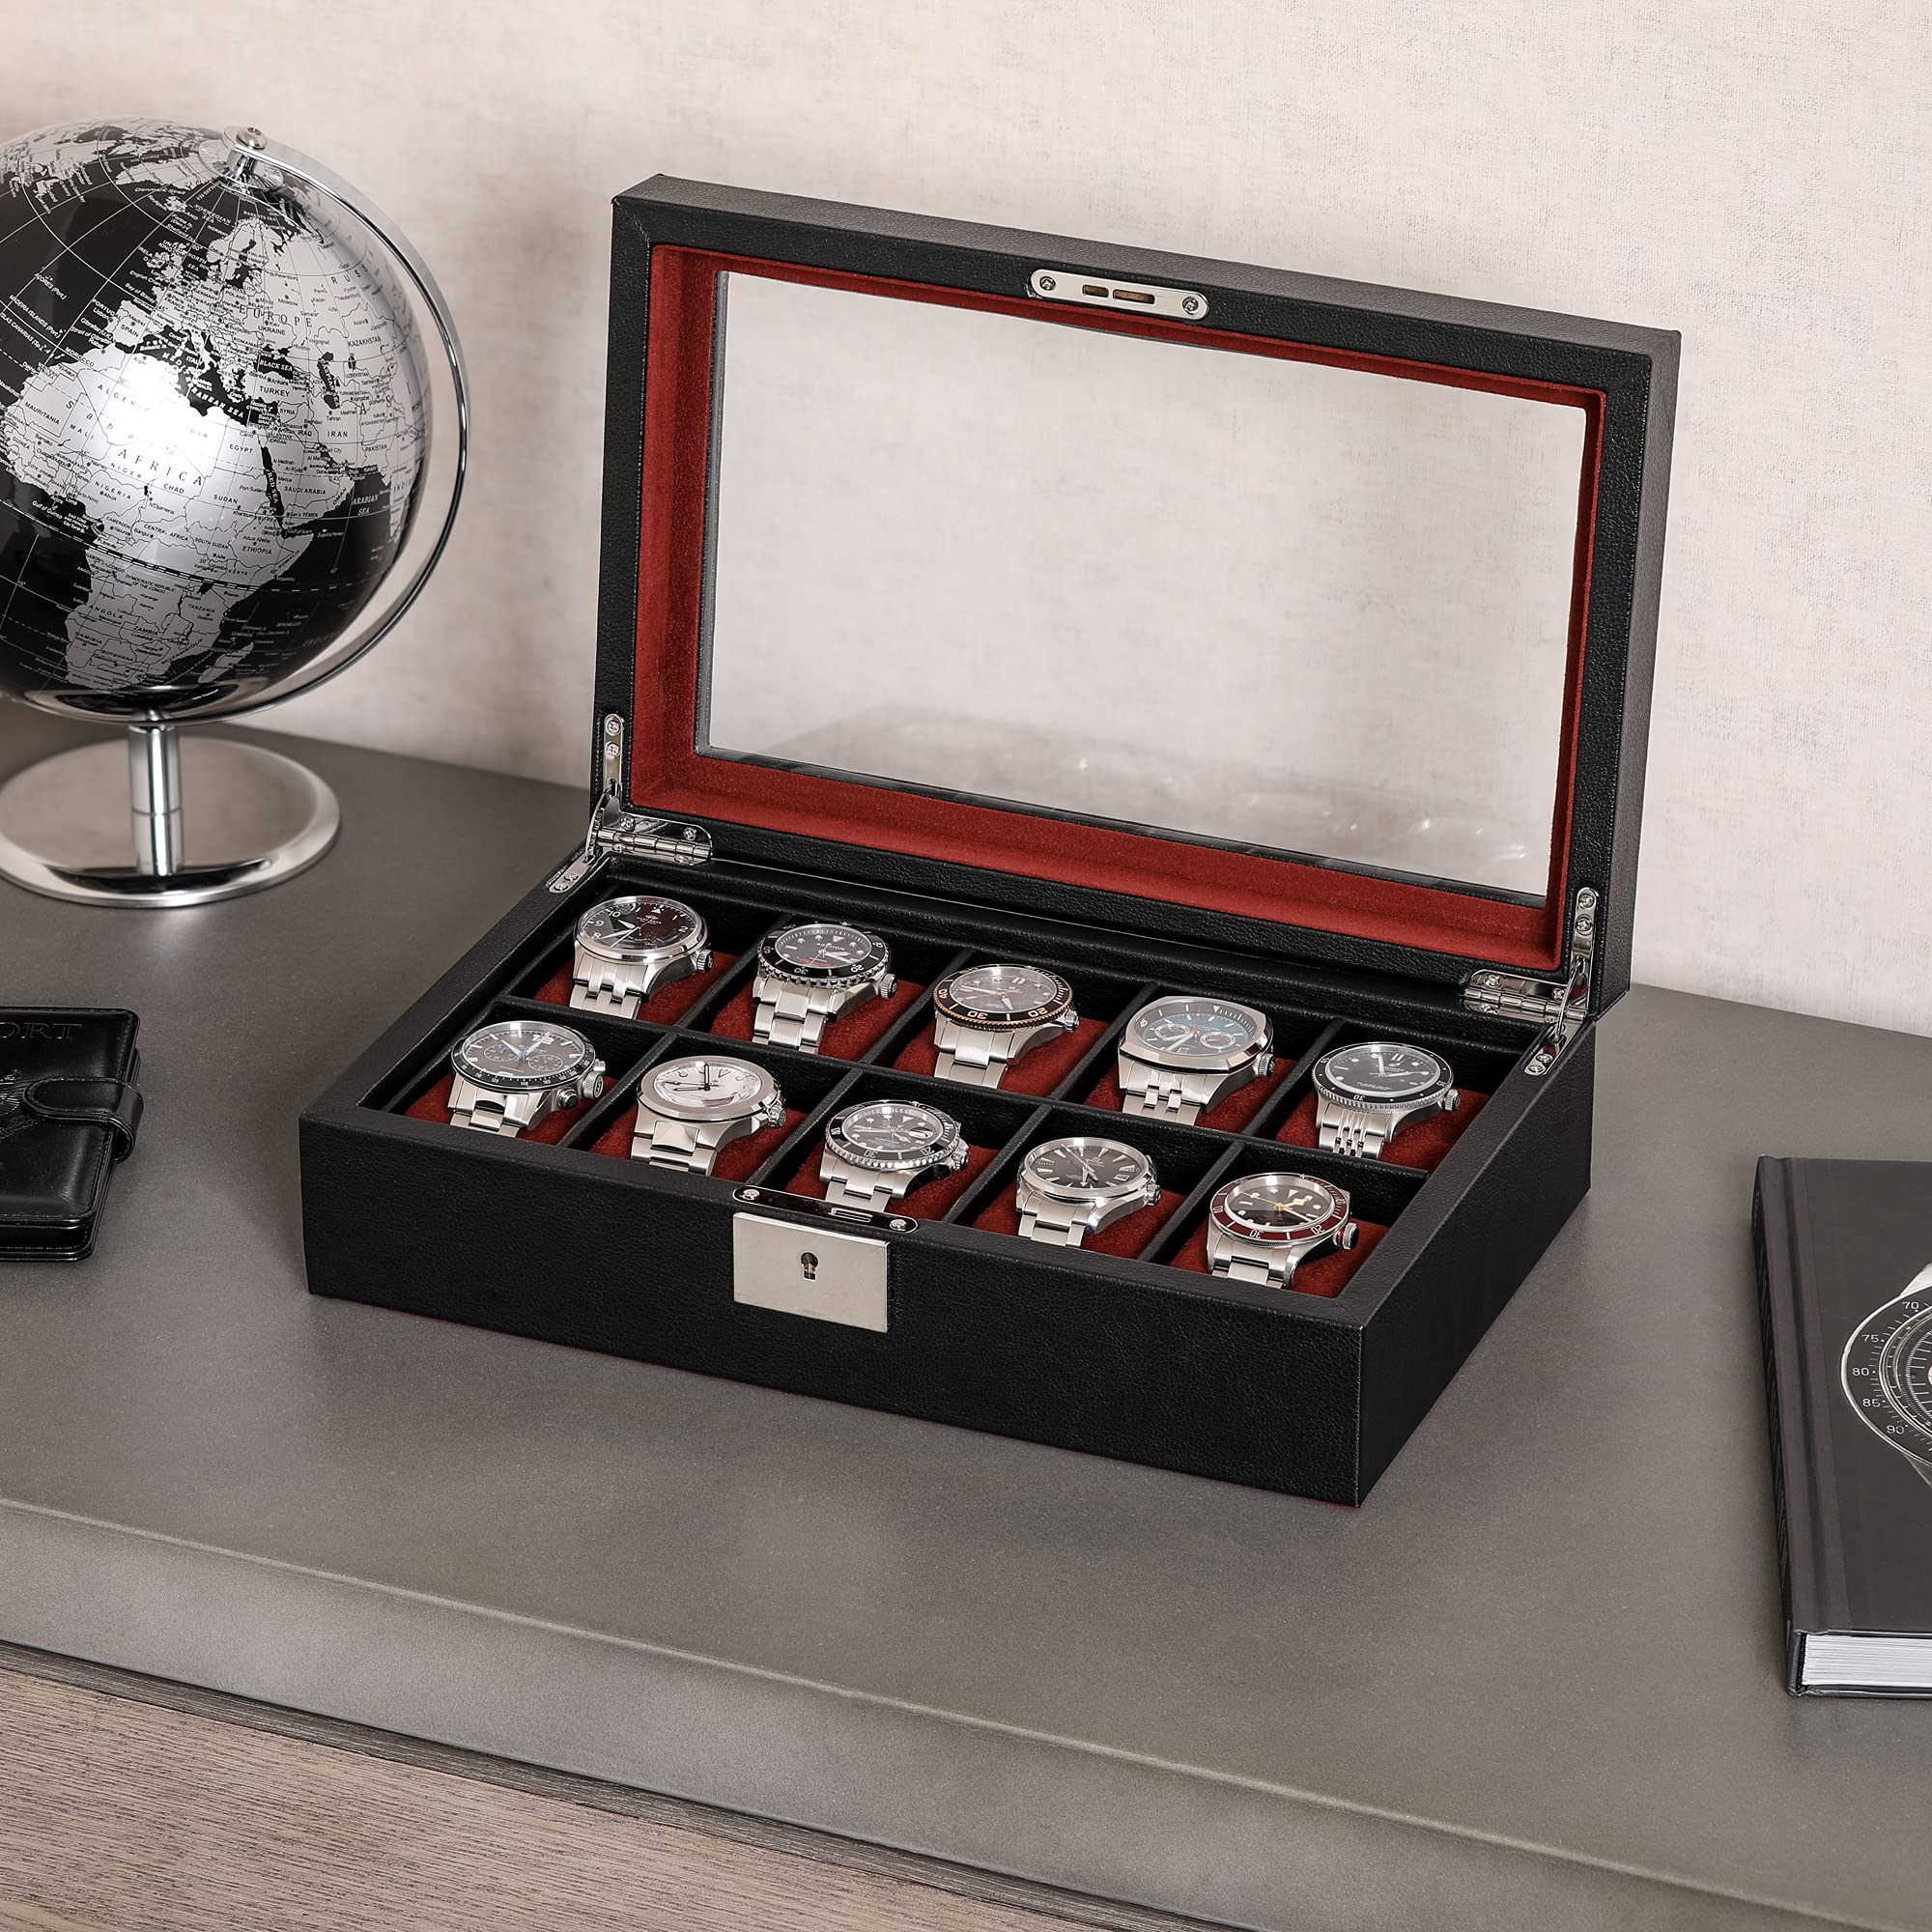 ROTHWELL Gift Set 10 Slot Leather Watch Box & Matching 2 Watch Travel Case - Luxury Watch Case Display Organizer, Locking Mens Jewelry Watches Holder, Men's Storage Boxes Glass Top Black/Red